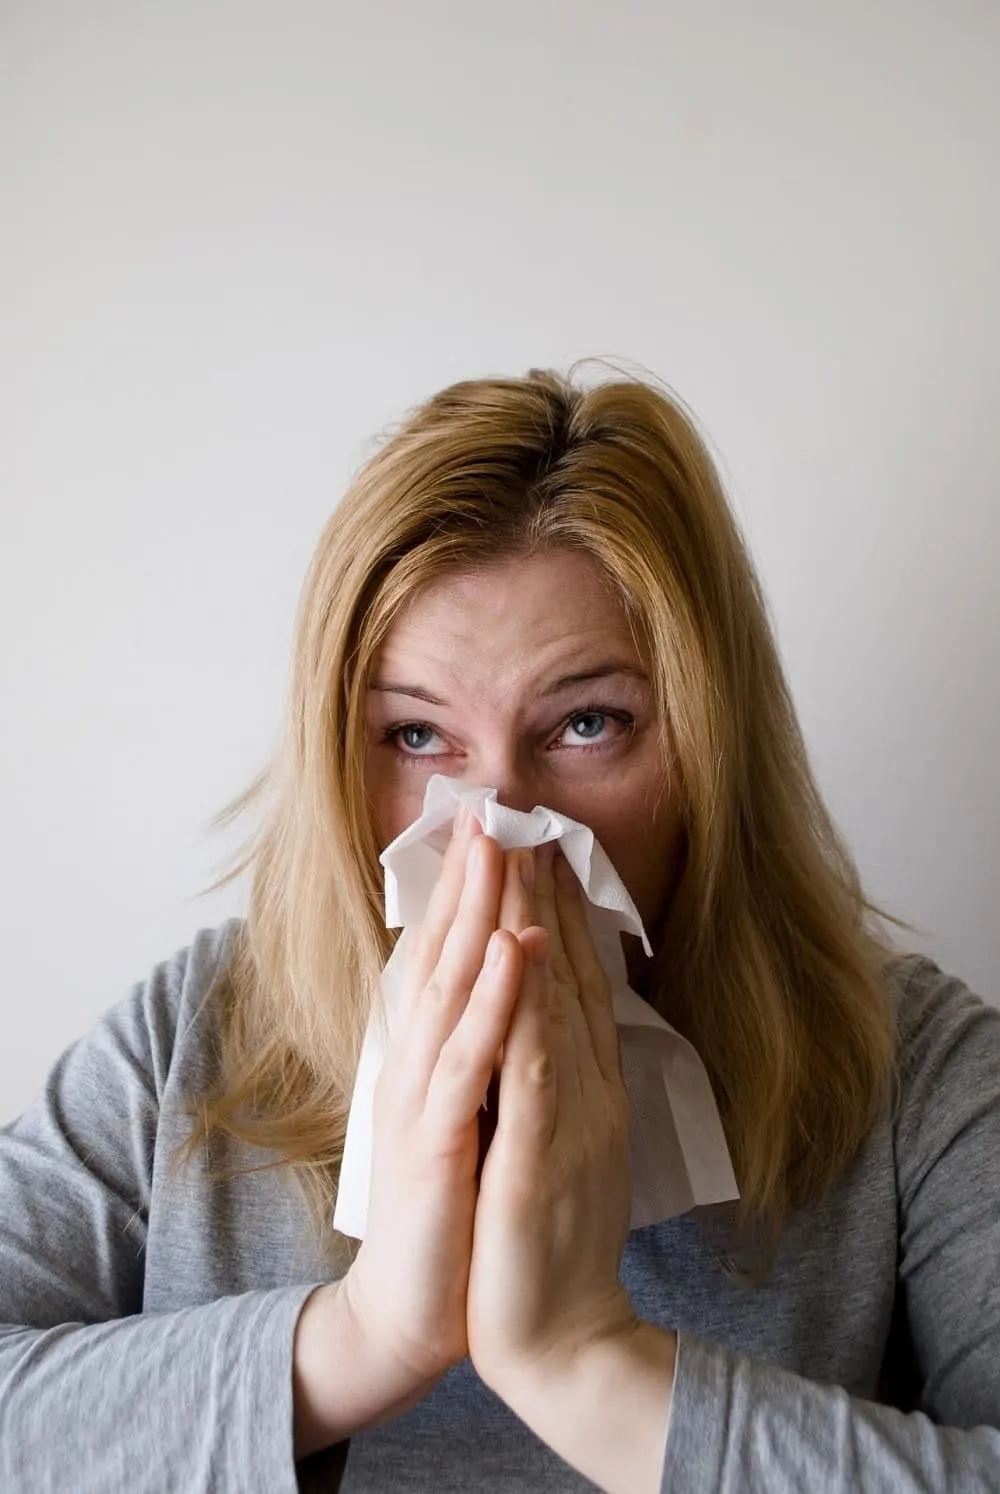 A Woman Sneezing into a Tissue